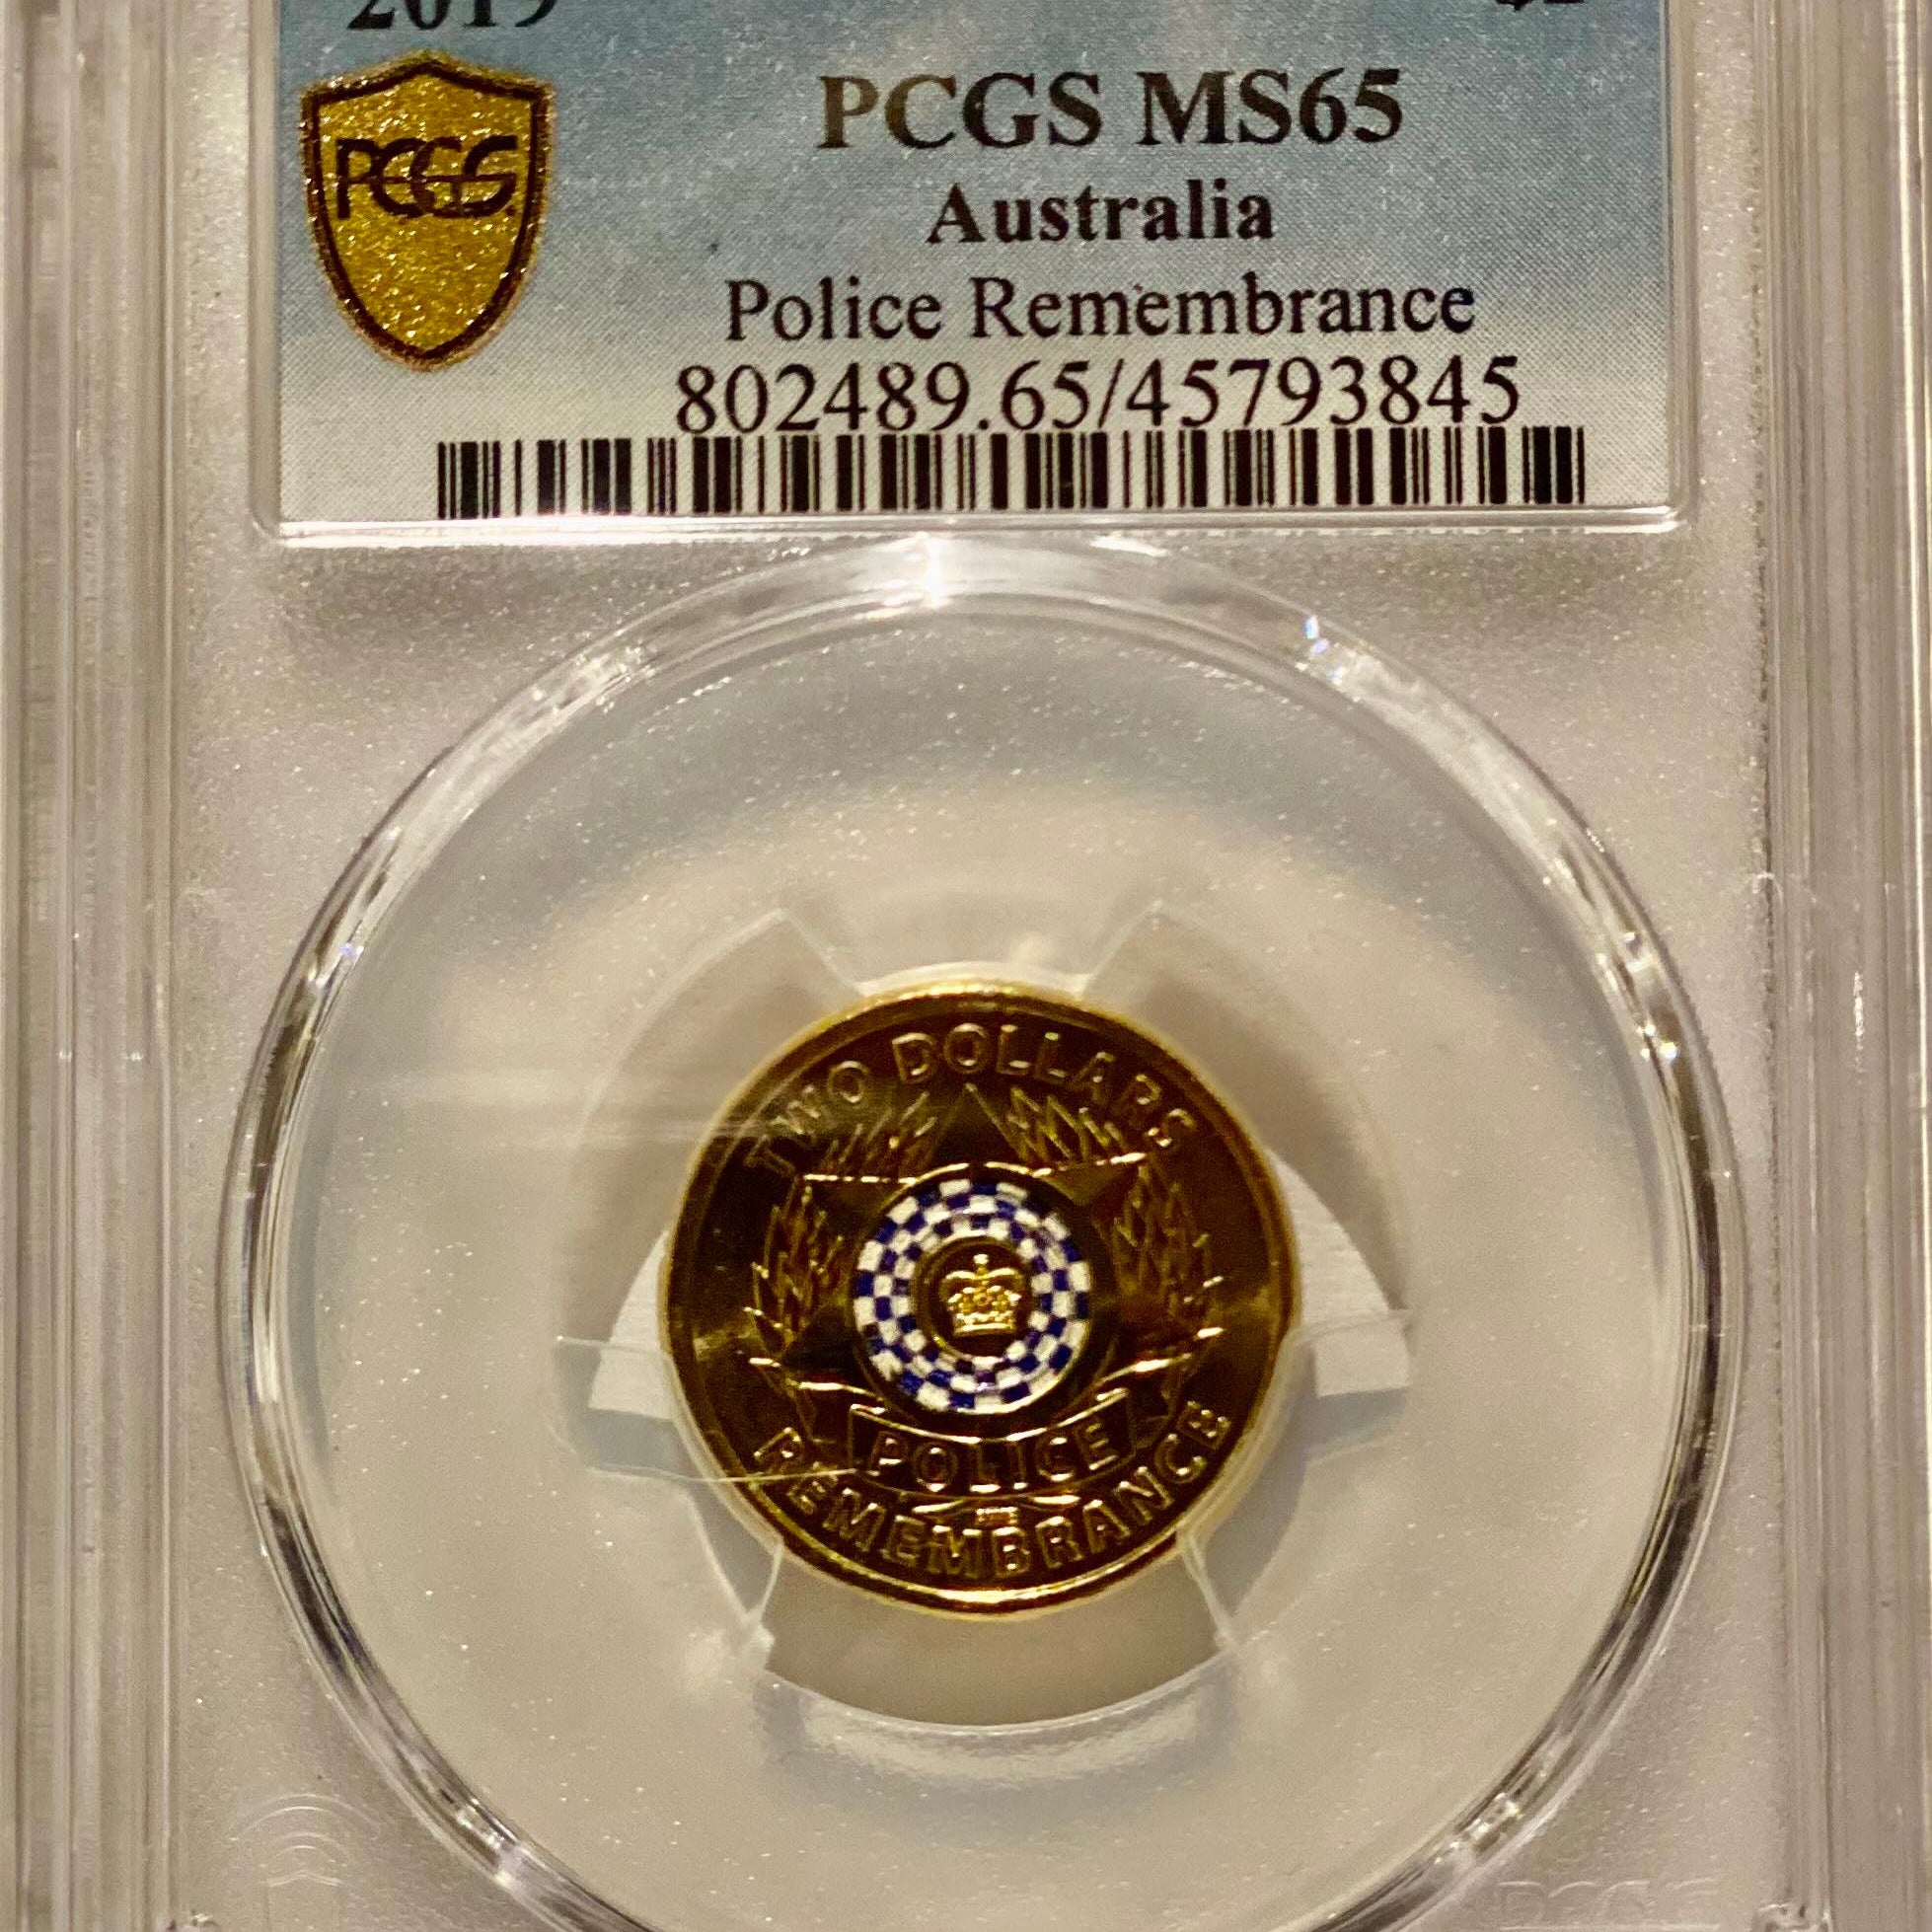 Royal Australian Mint 2019 Police Remembrance $2 Coin - PCGS MS65